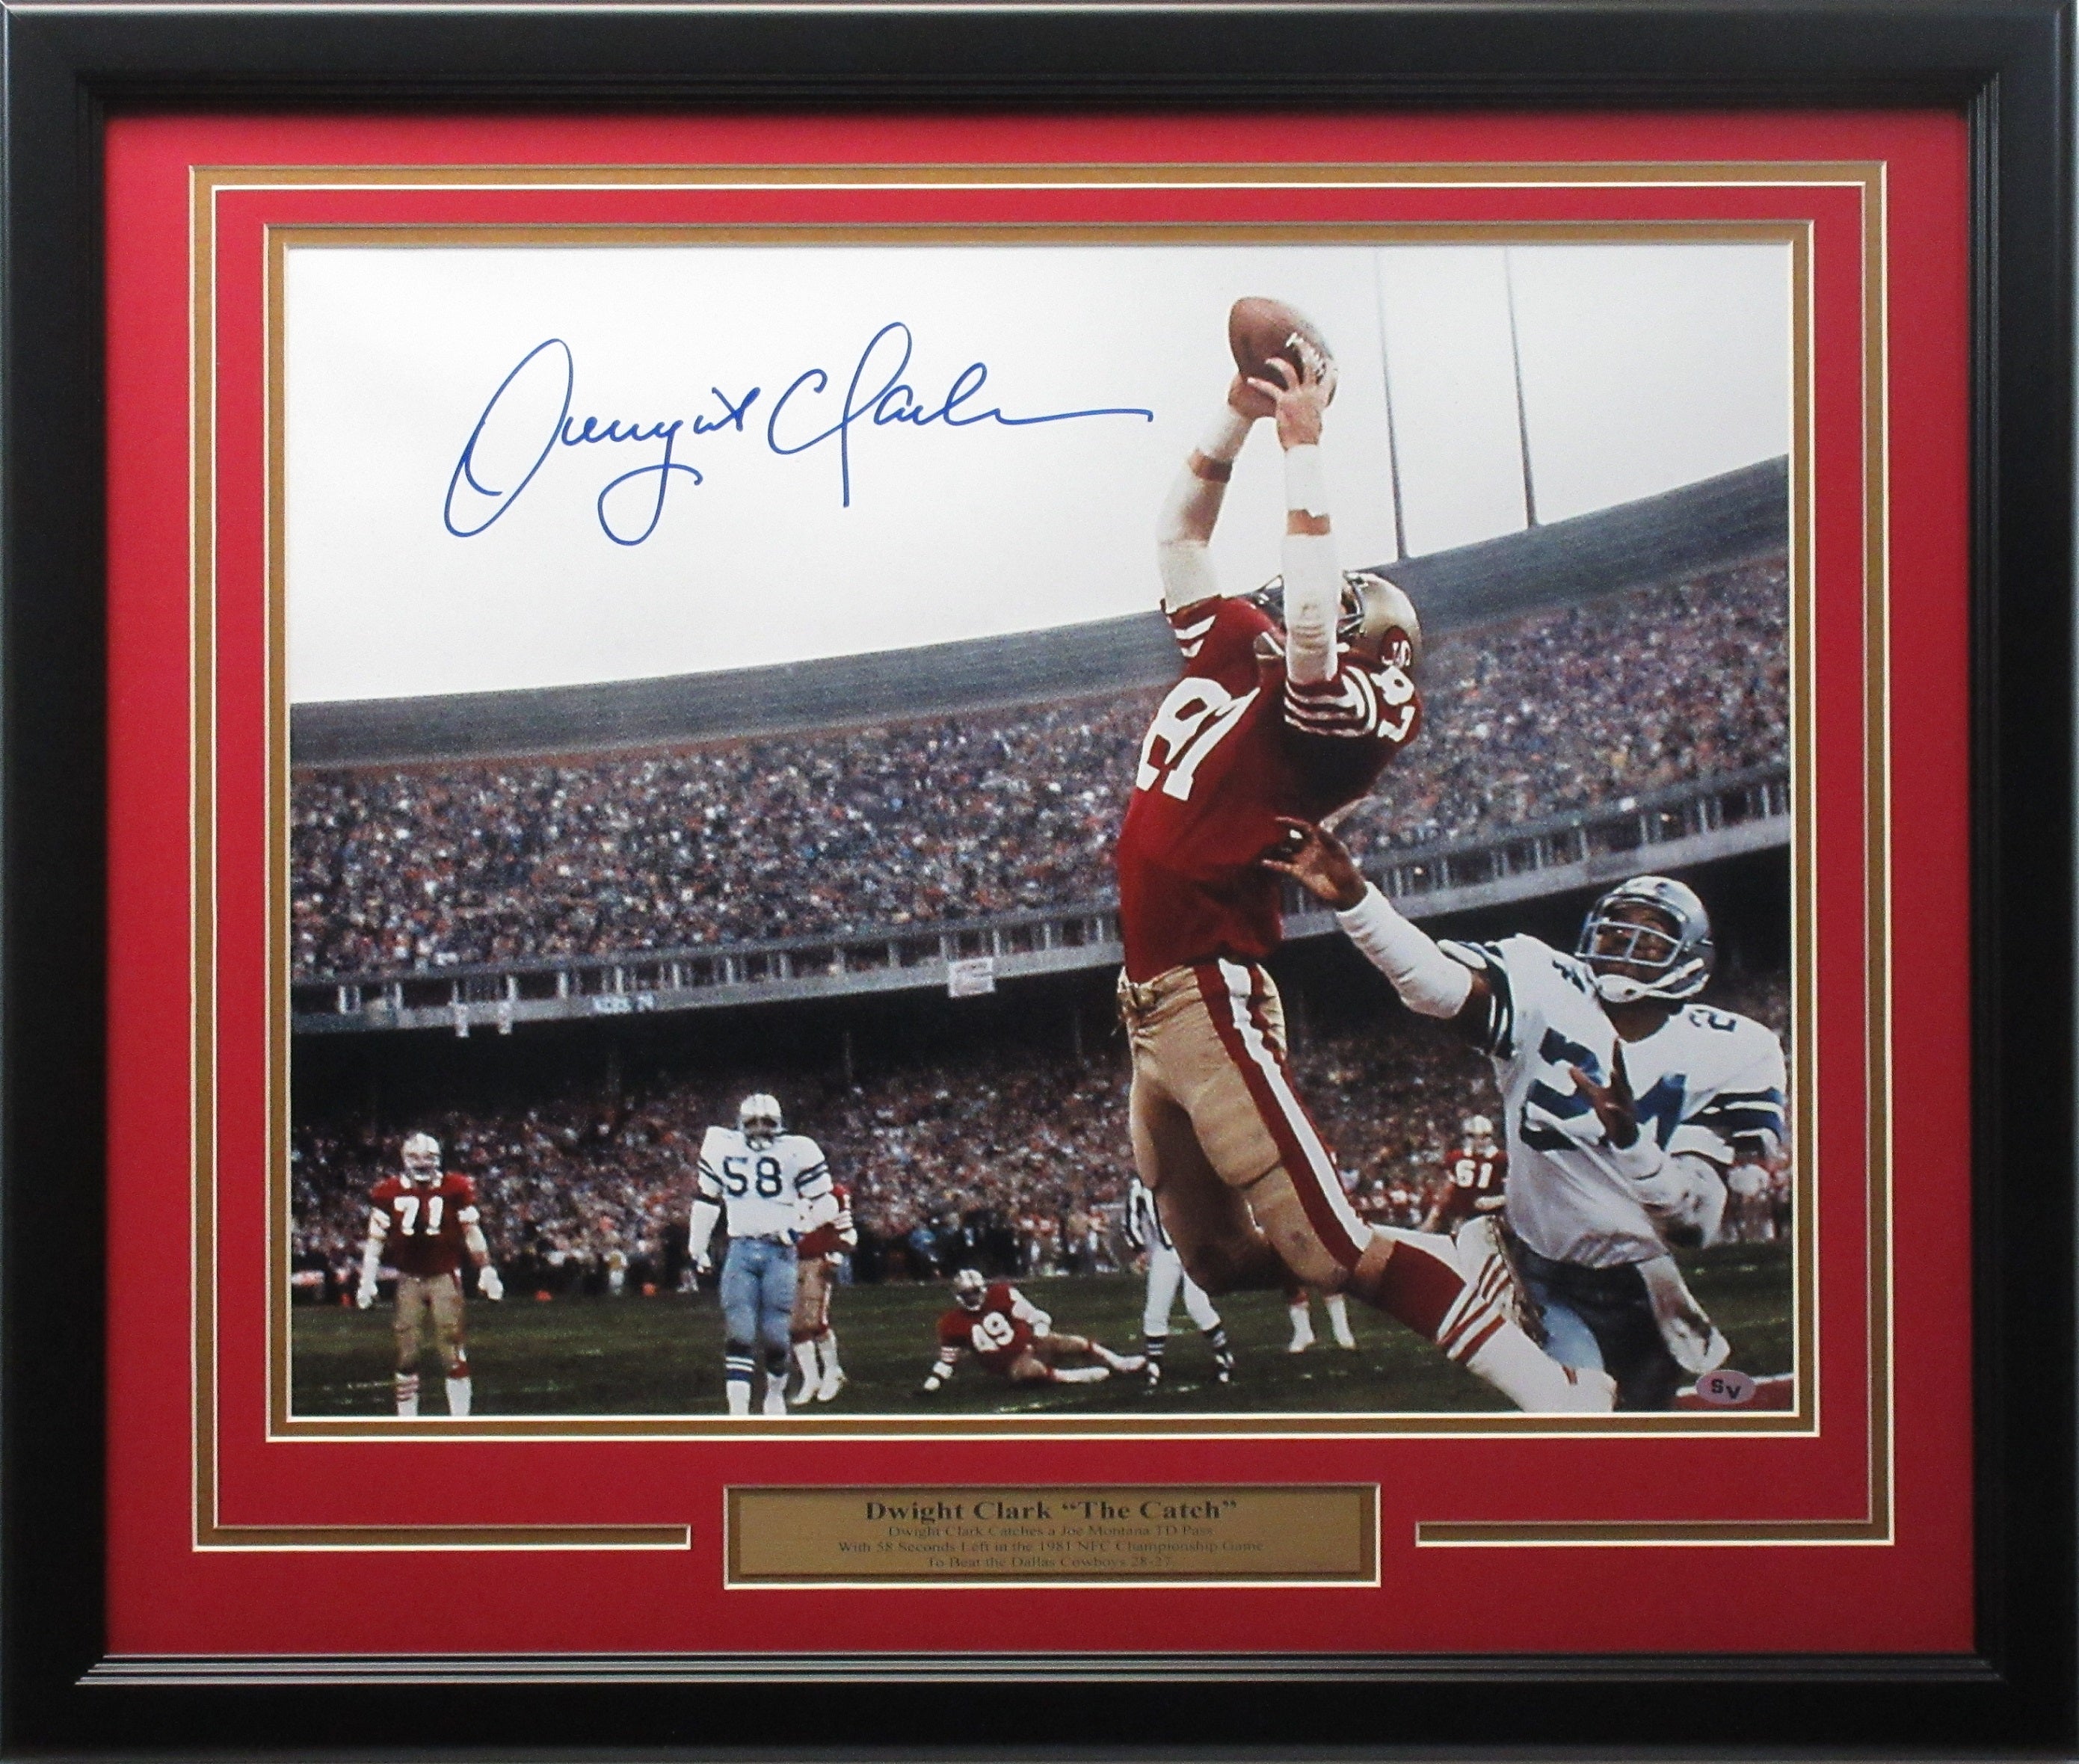 Dwight Clark Autographed 16x20 San Francisco 49ers 'The Catch' Photo Framed